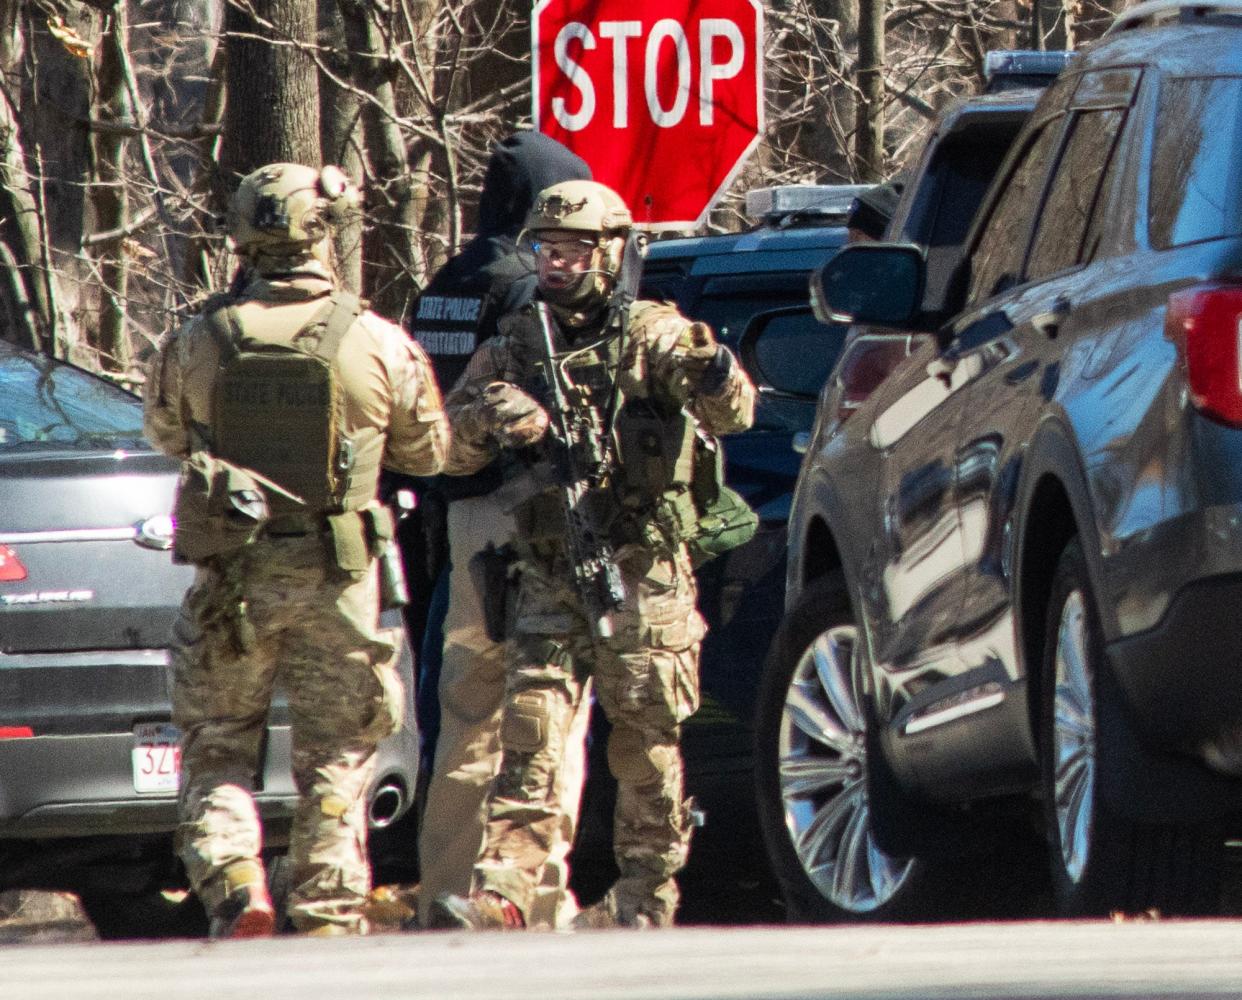 Members of a state police tactical unit gather int he area of Route 101 and Willard Road in Ashburnham Thursday morning. There was a standoff with a man who refused to exit his vehicle.